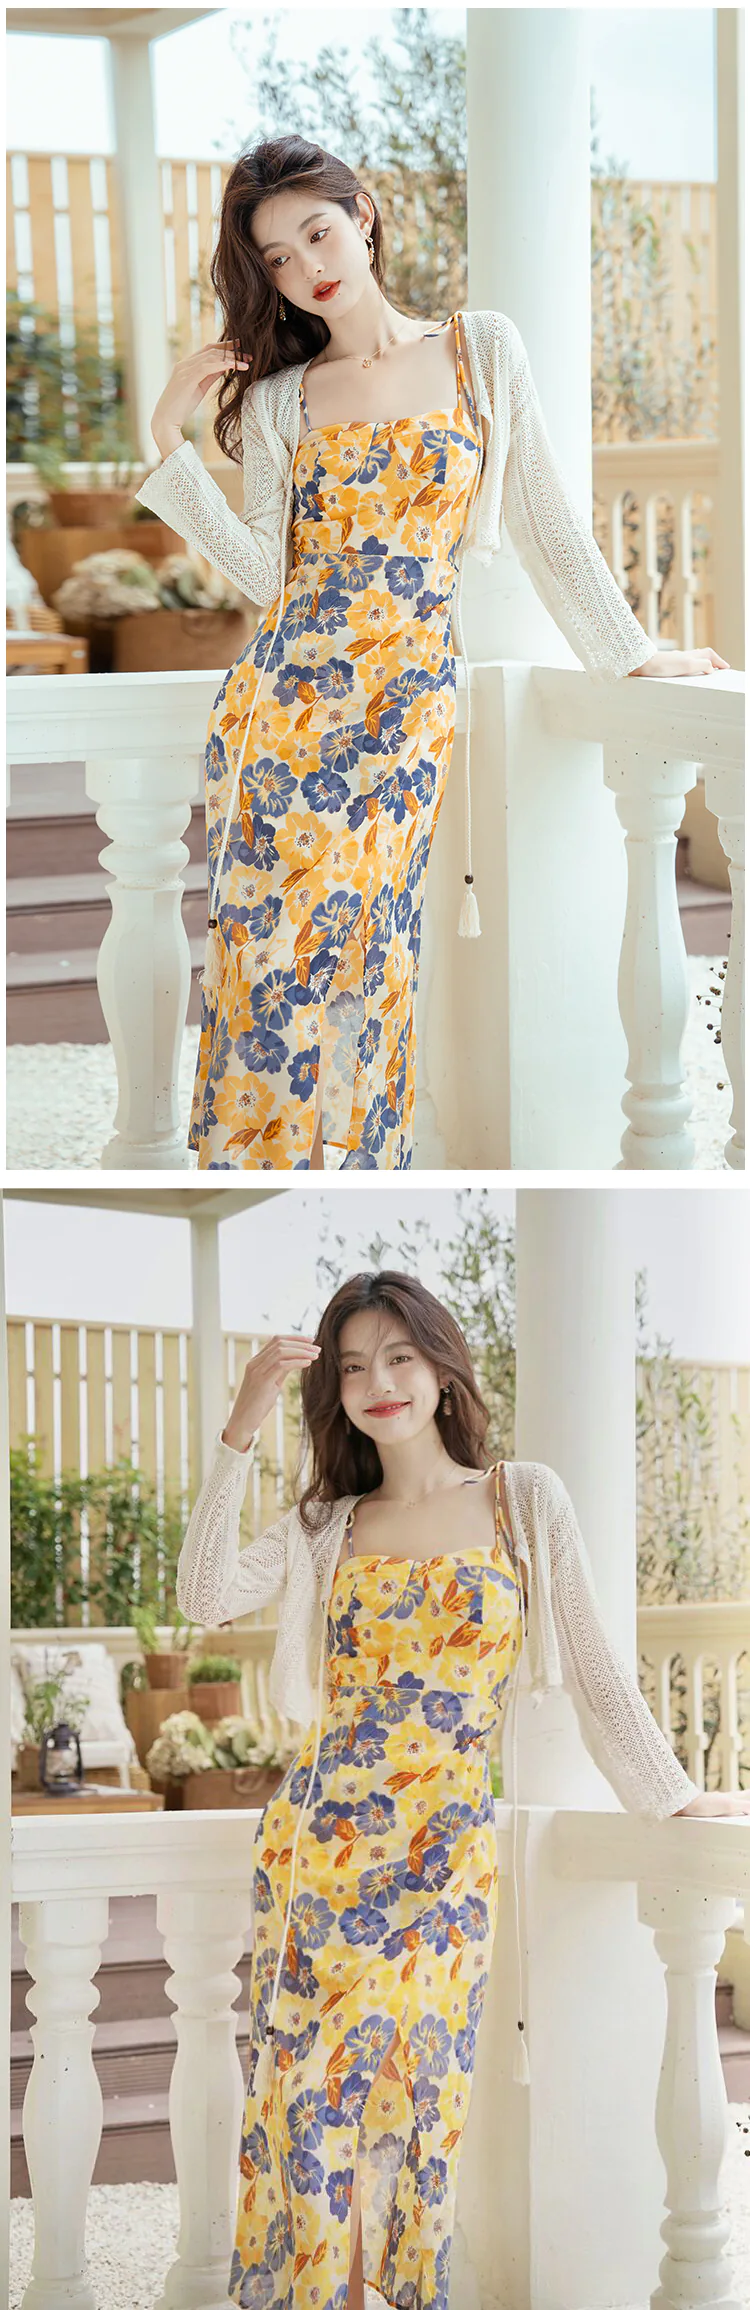 Sweet-Floral-Printed-Yellow-Summer-Beach-Slip-Dress-with-Knit-Cardigan17